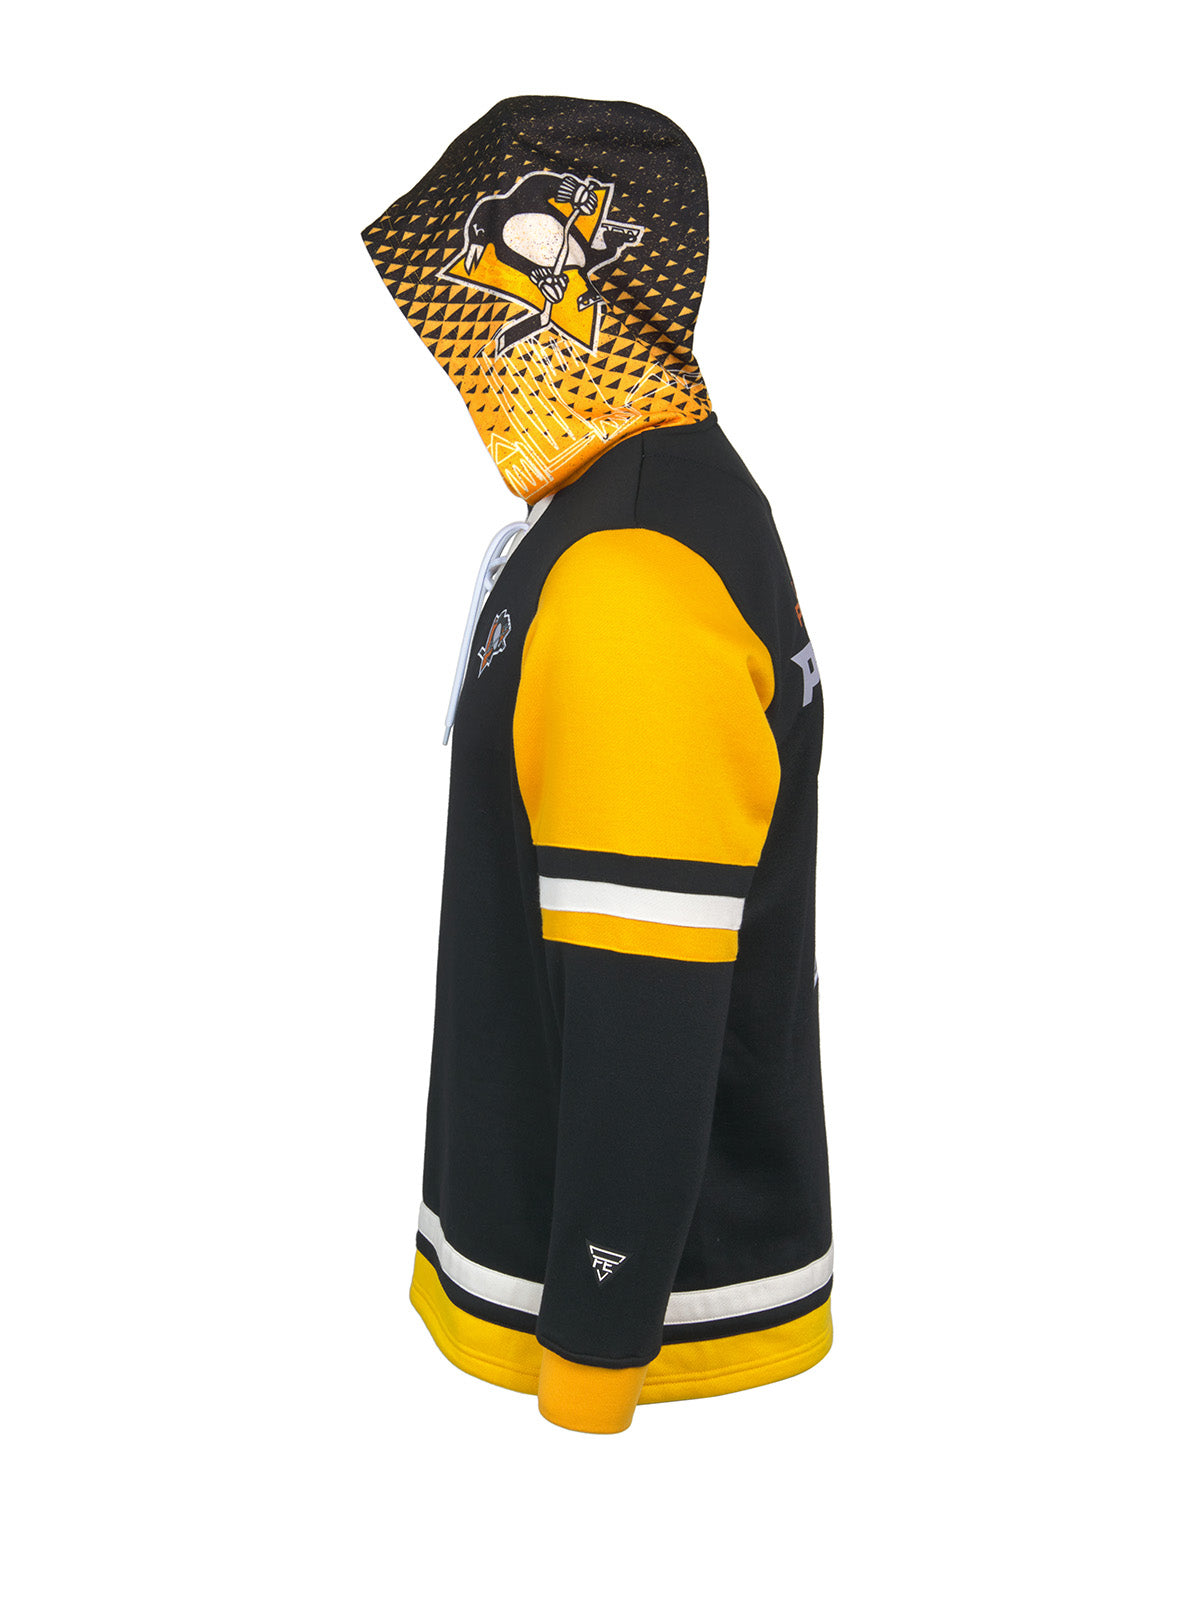 Pittsburgh Penguins Lace-Up Hoodie